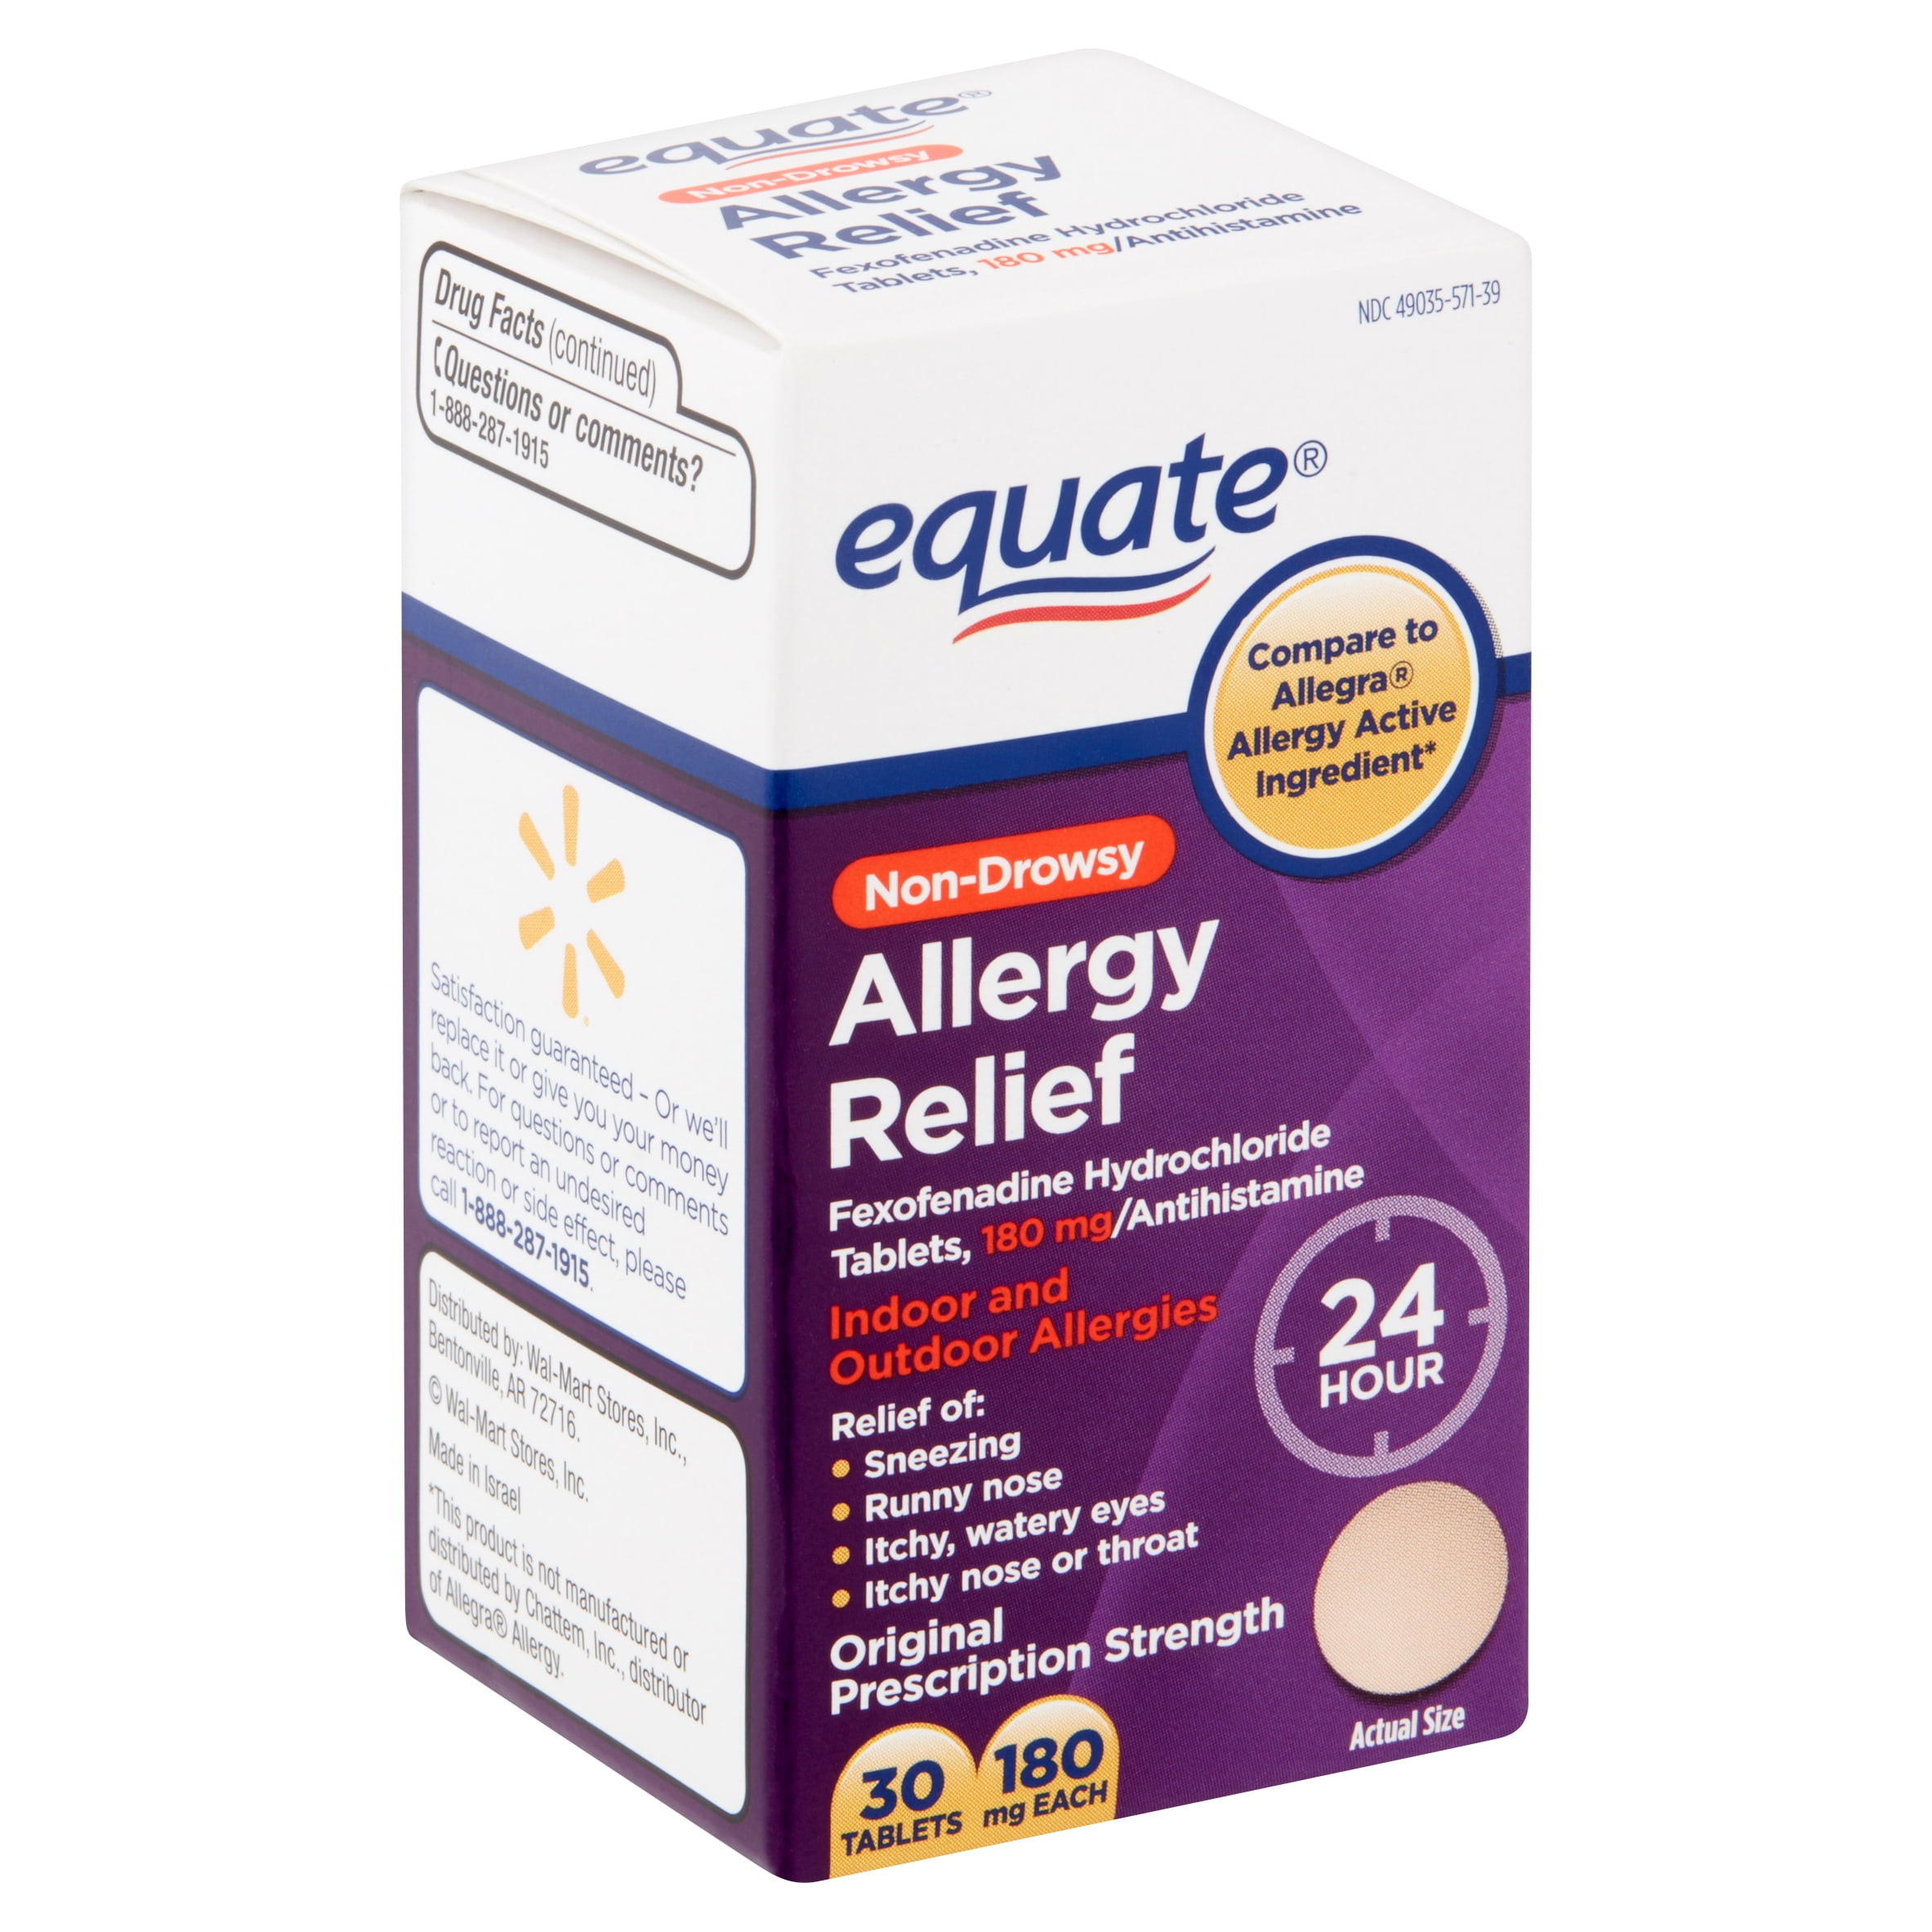 Equate Non-Drowsy Allergy Relief Tablets 180mg, 30 Ct - Walmart Inventory C...